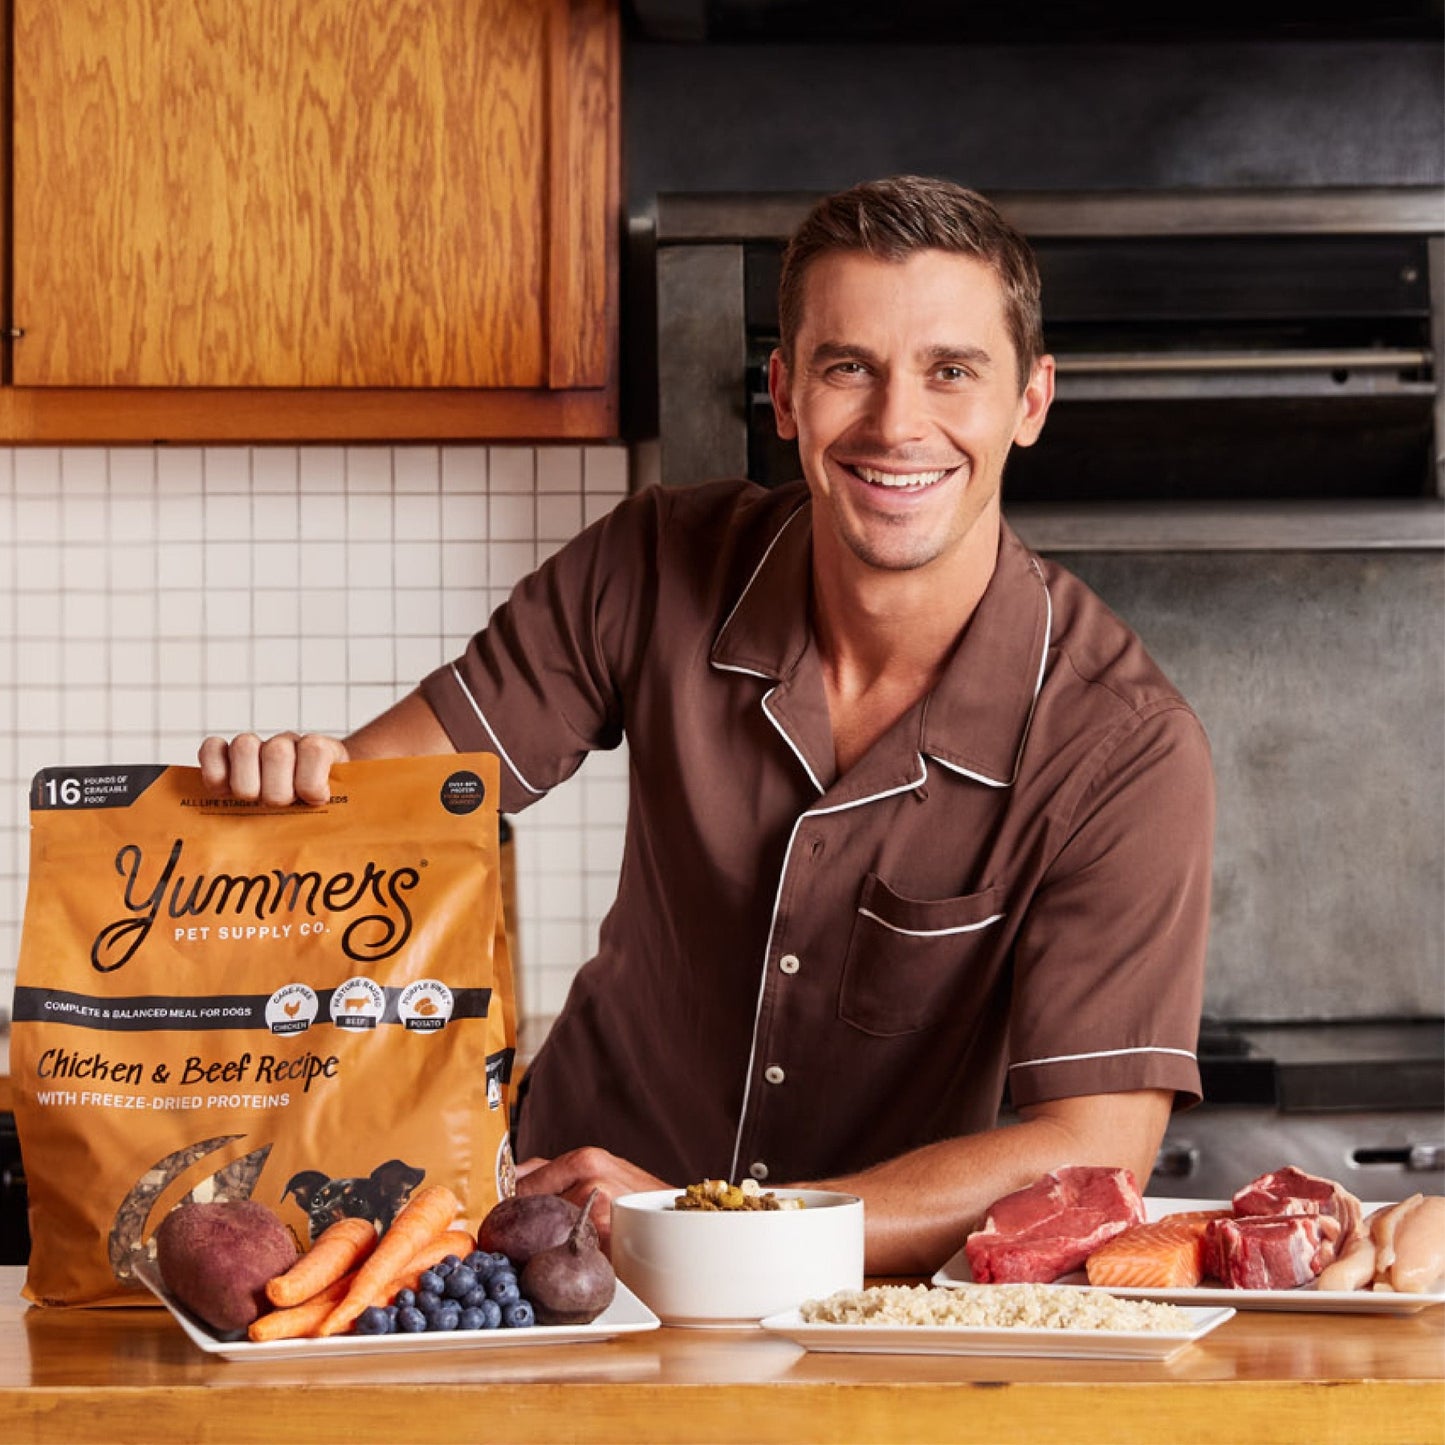 Antoni and Yummers Chicken & Beef Dog Food